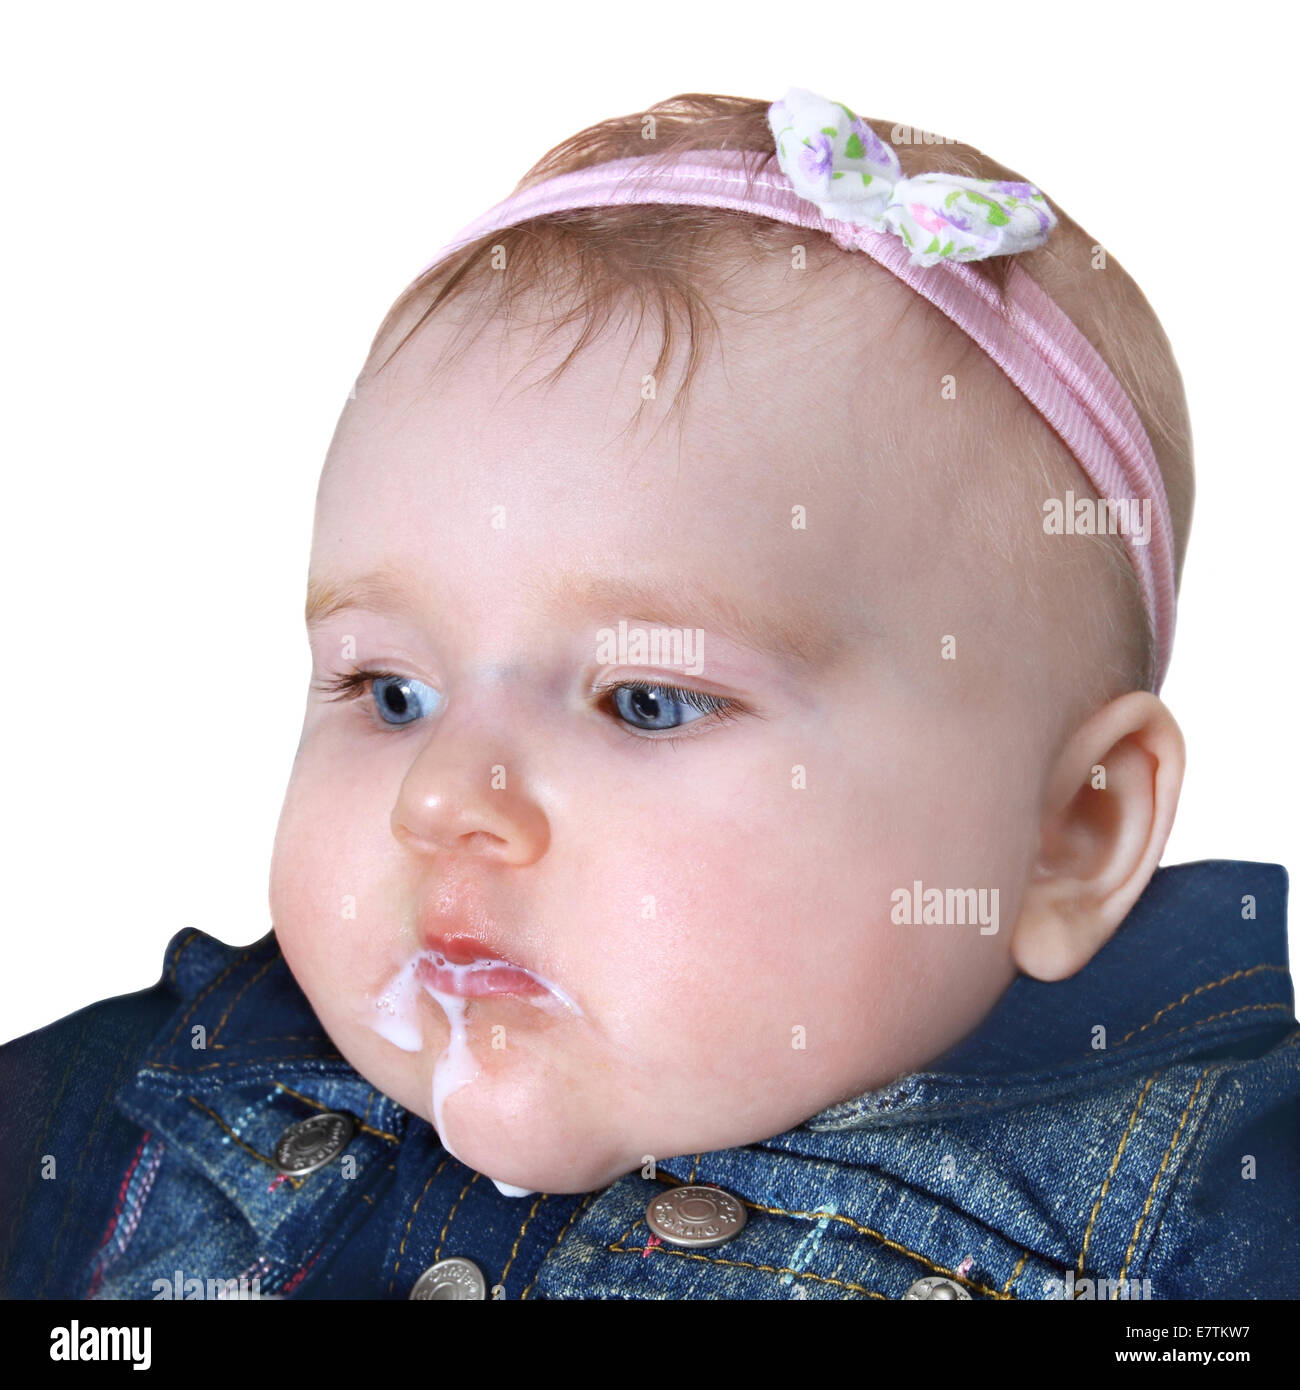 Infant with face smeared in milk closeup portrait isolated on white background Stock Photo